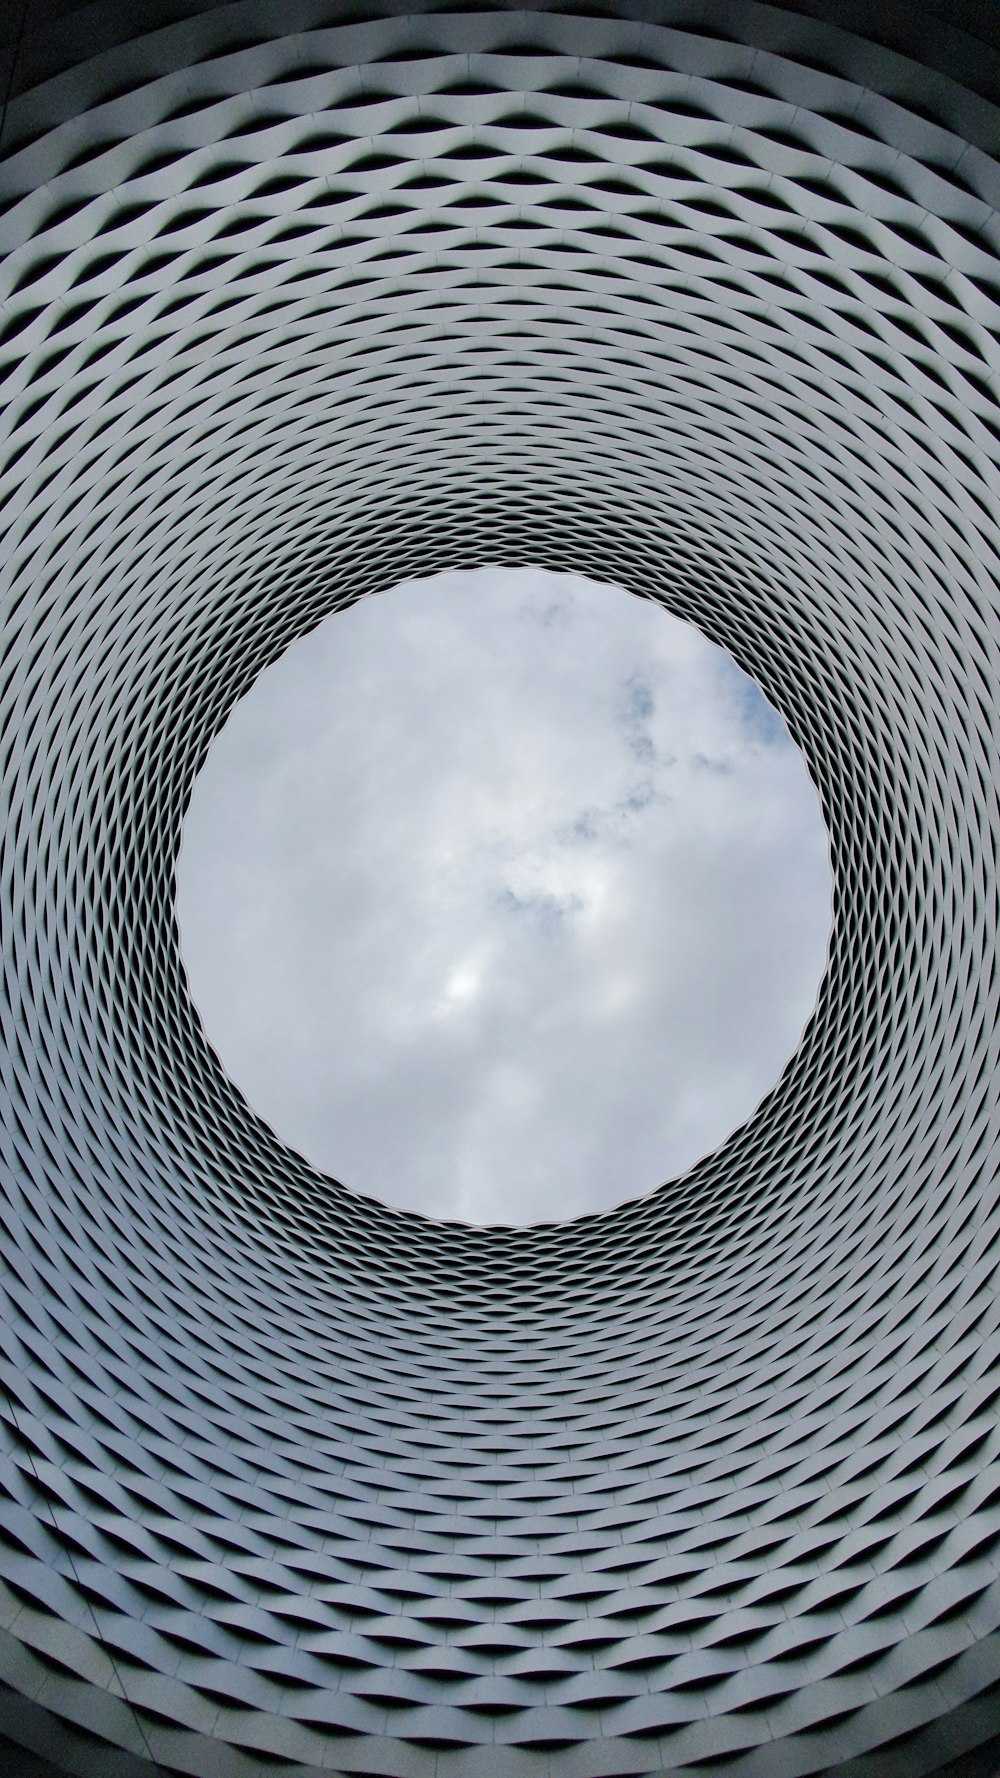 a circular object with a sky in the background